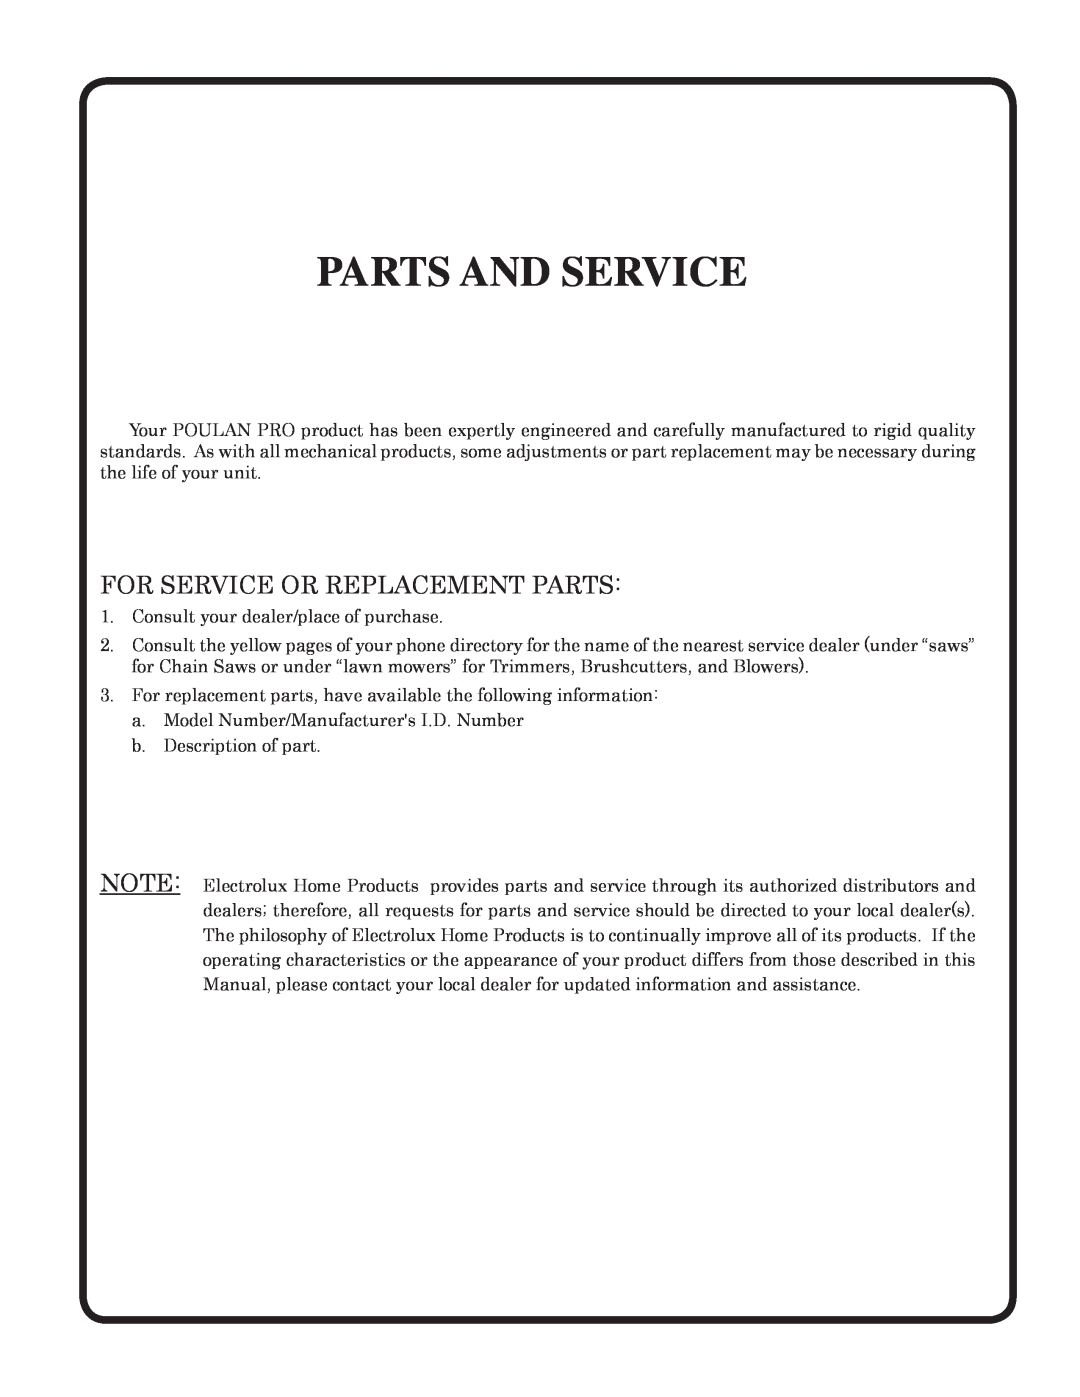 Poulan 954569707, 185491 owner manual Parts And Service, For Service Or Replacement Parts 